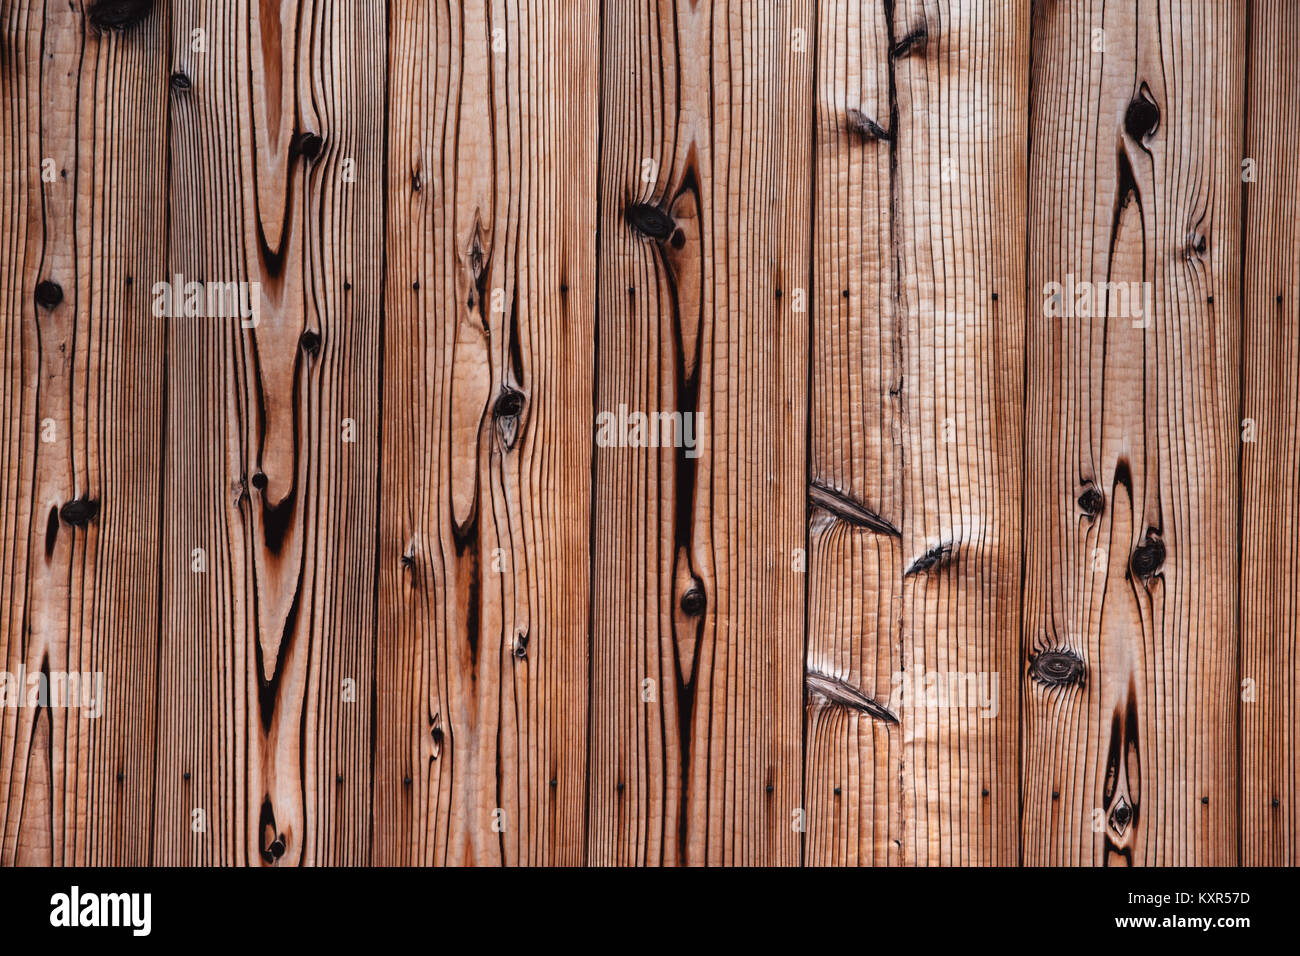 japanese pine wood wall pattern texture for background Stock Photo